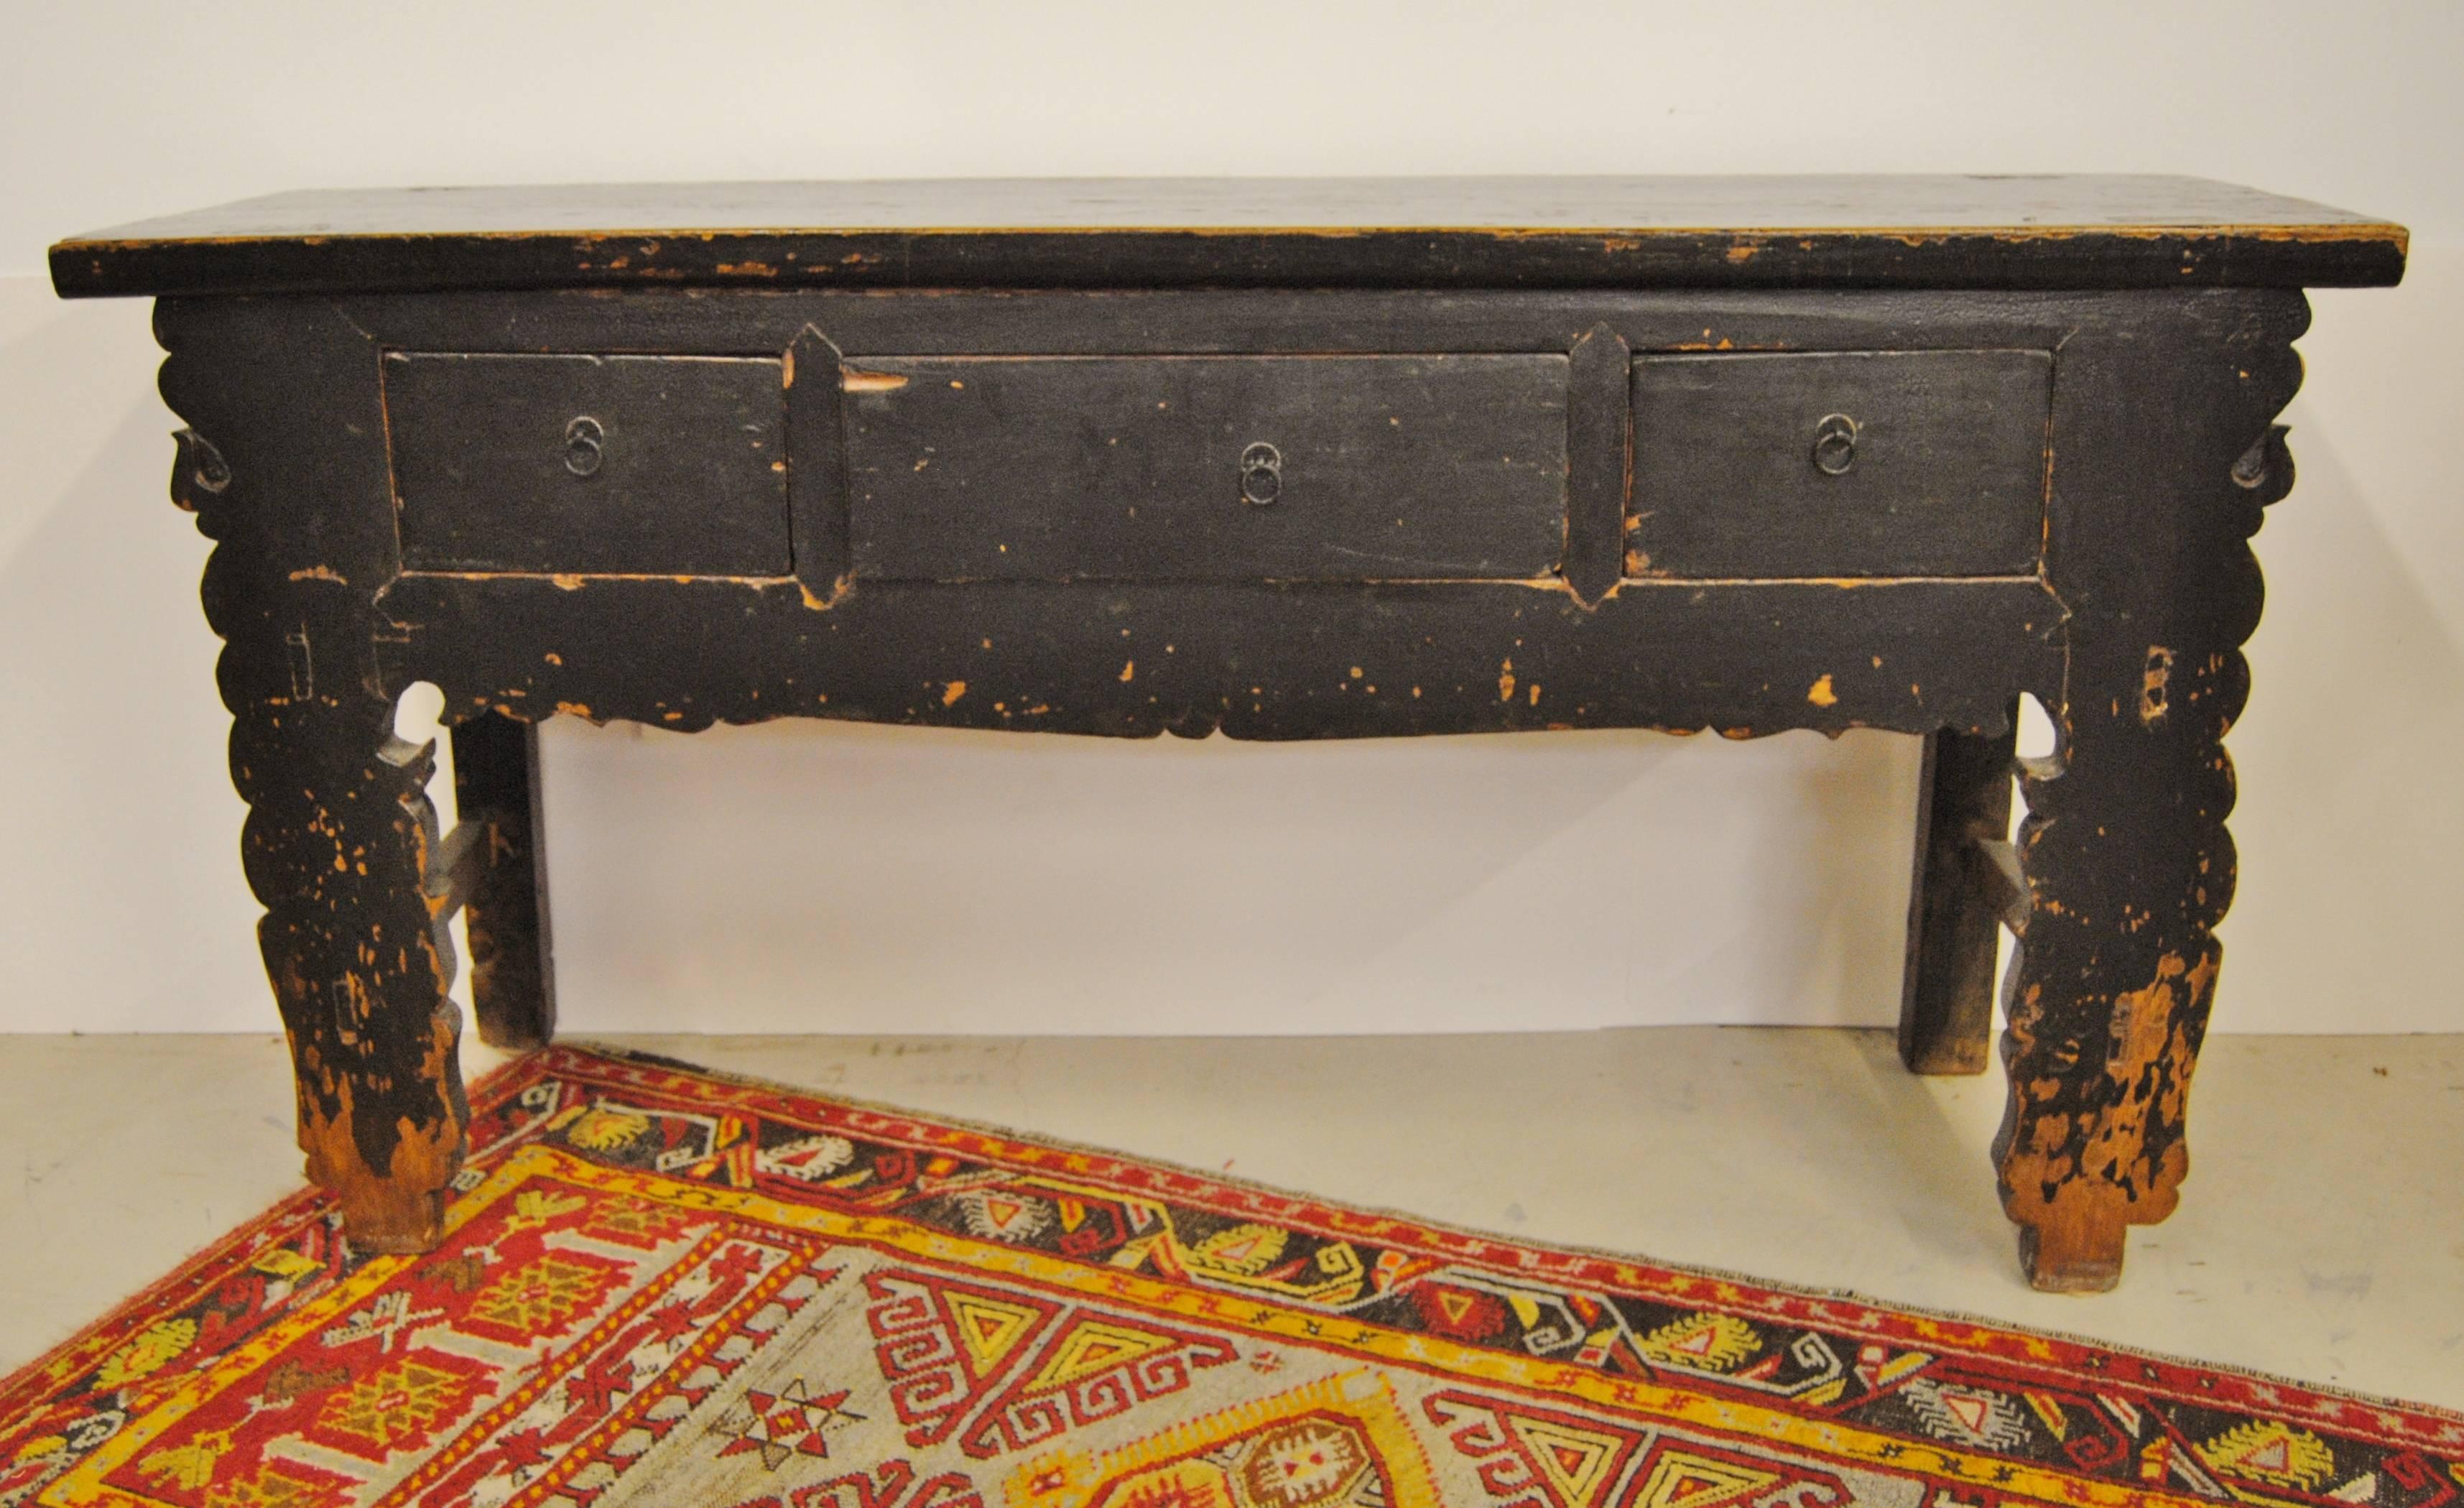 Antique Chinese elmwood sideboard with three drawers from Gansu Province, circa 1900. The Asian table has original lacquer and paint. Scalloped design on the legs adds a whimsical touch. Age appropriate wear on the legs is typical of many country